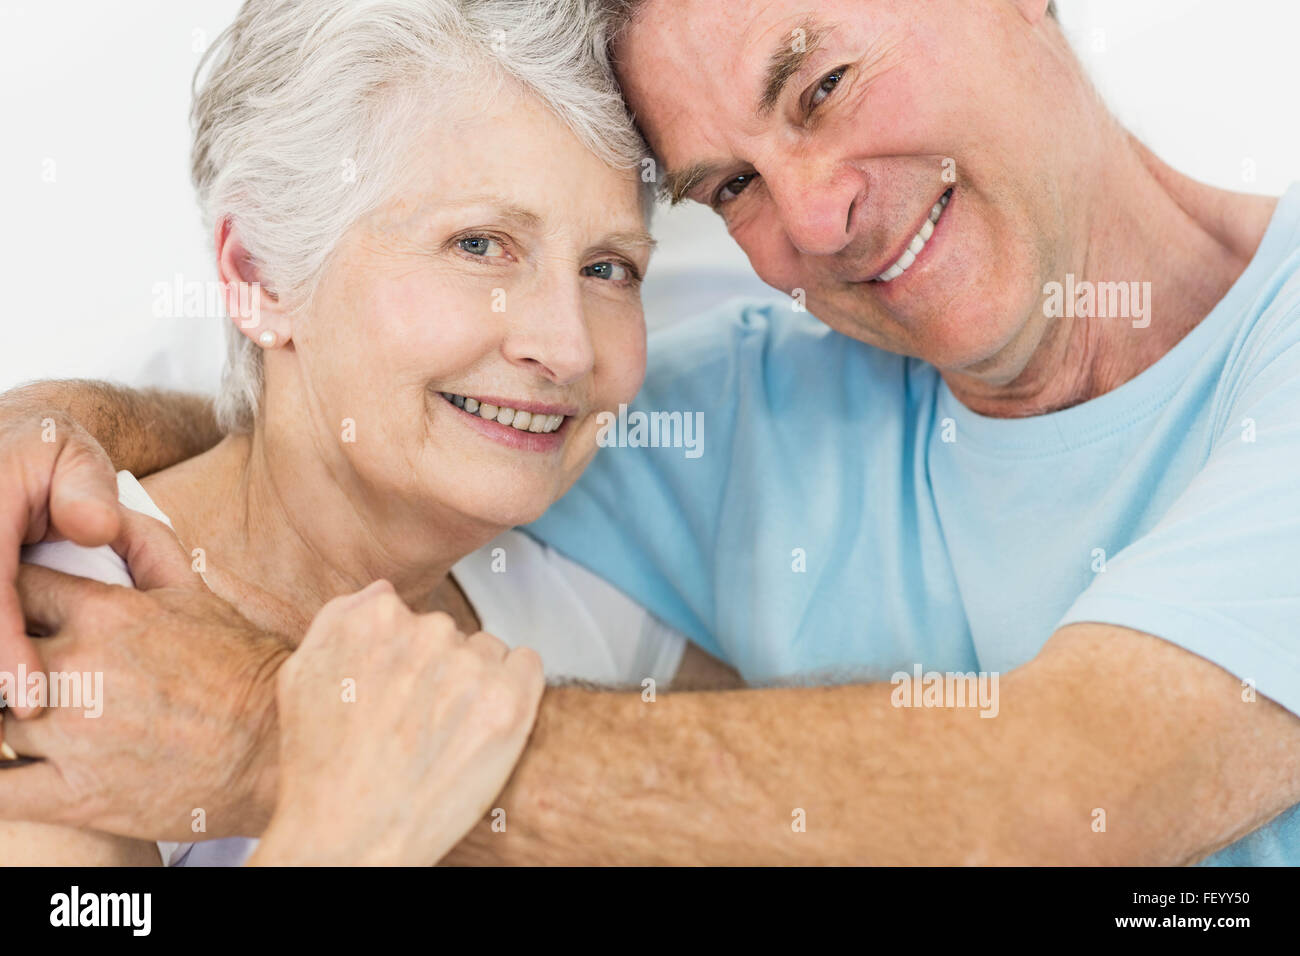 Senior couple face to face smiling at the camera Stock Photo